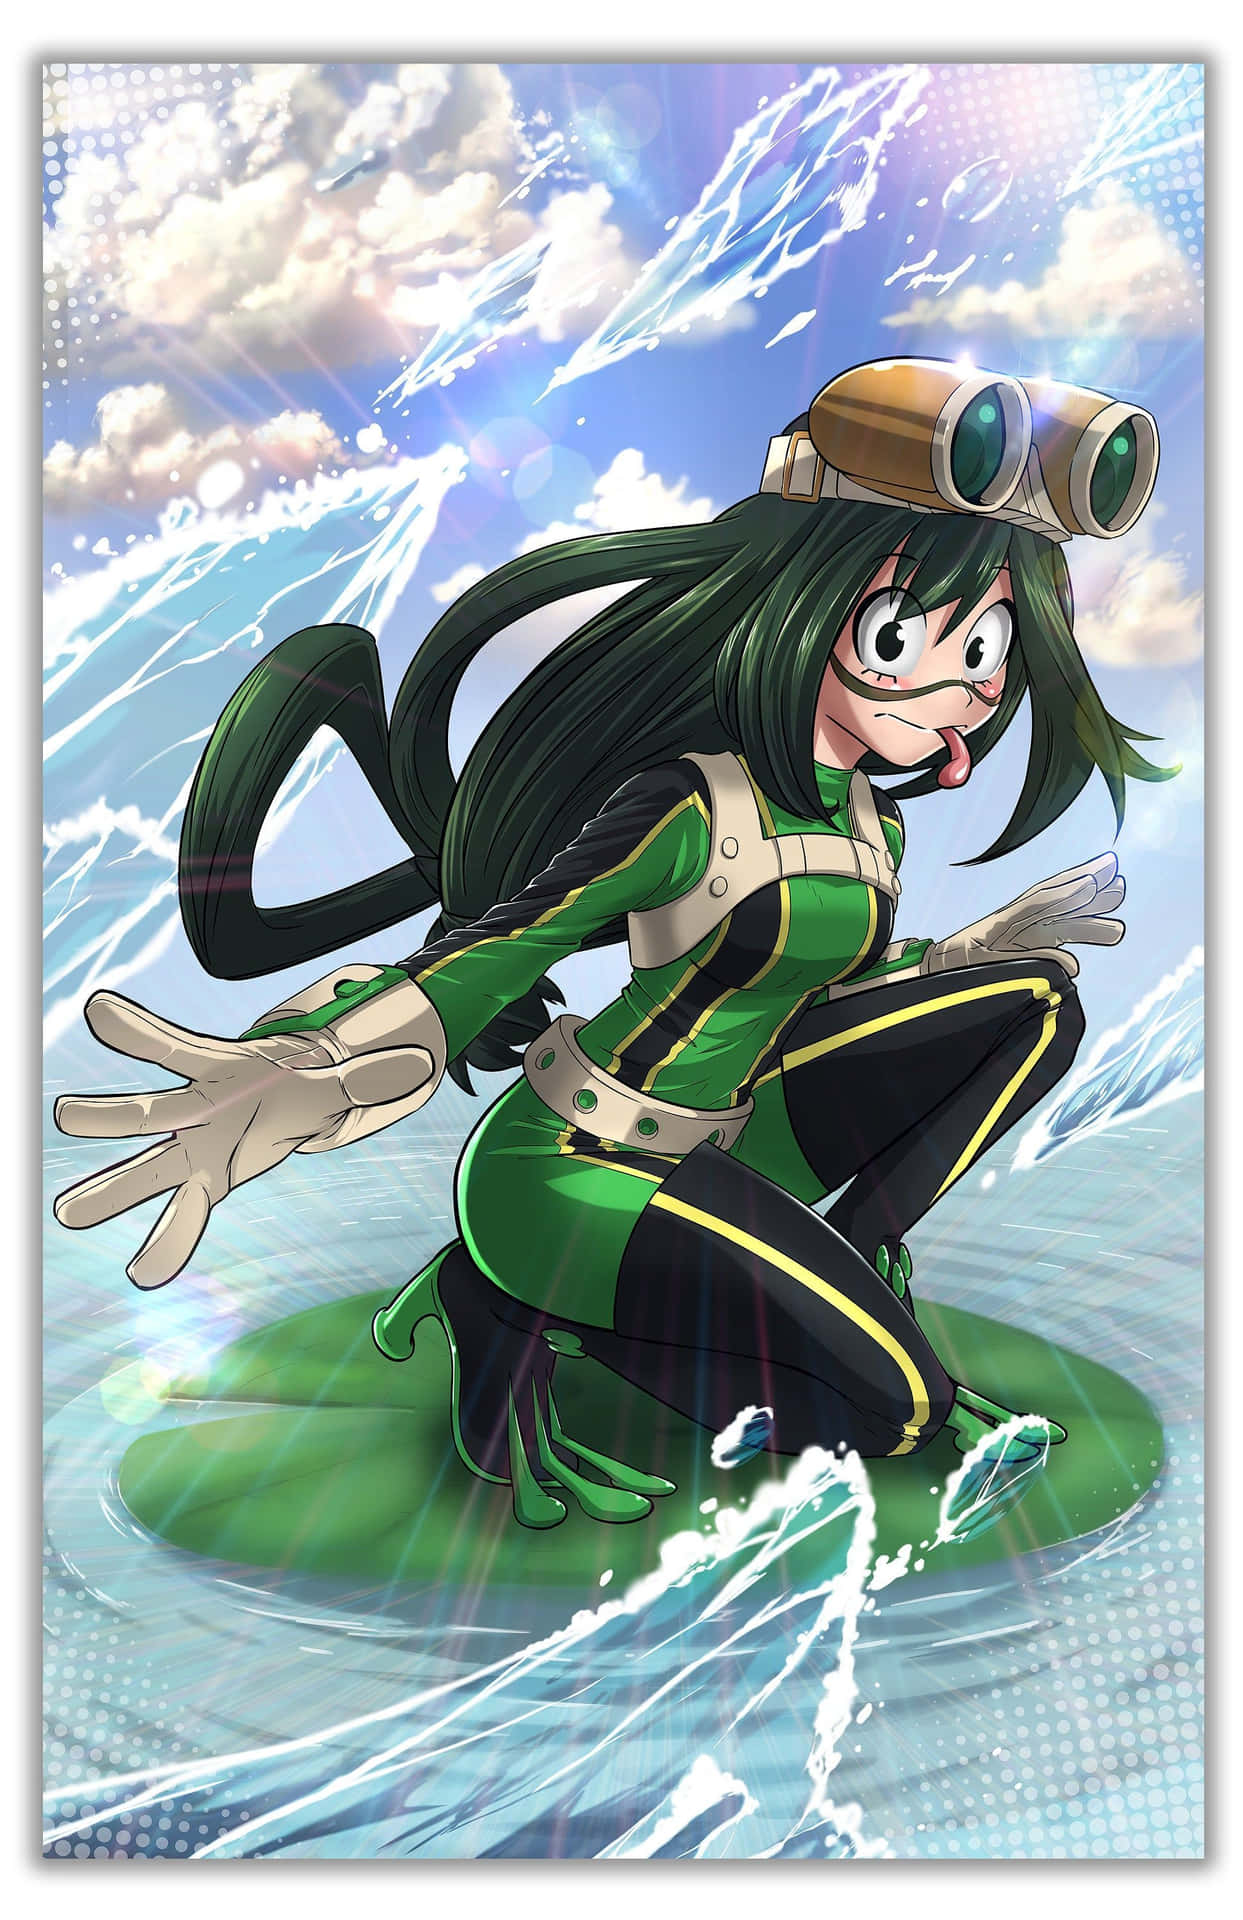 Playing in the Spring with Froppy